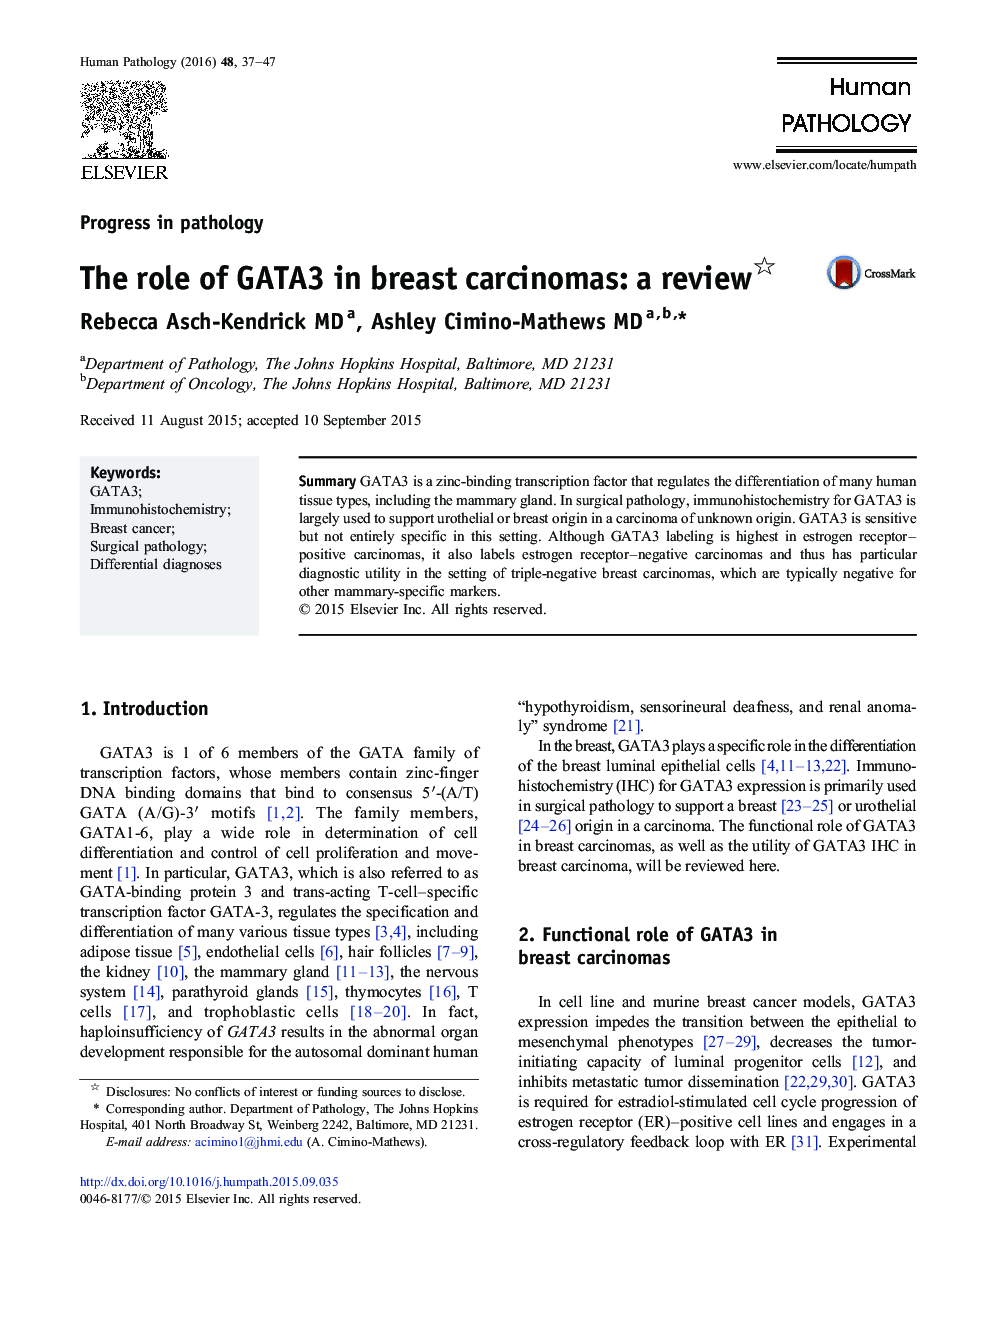 The role of GATA3 in breast carcinomas: a review 